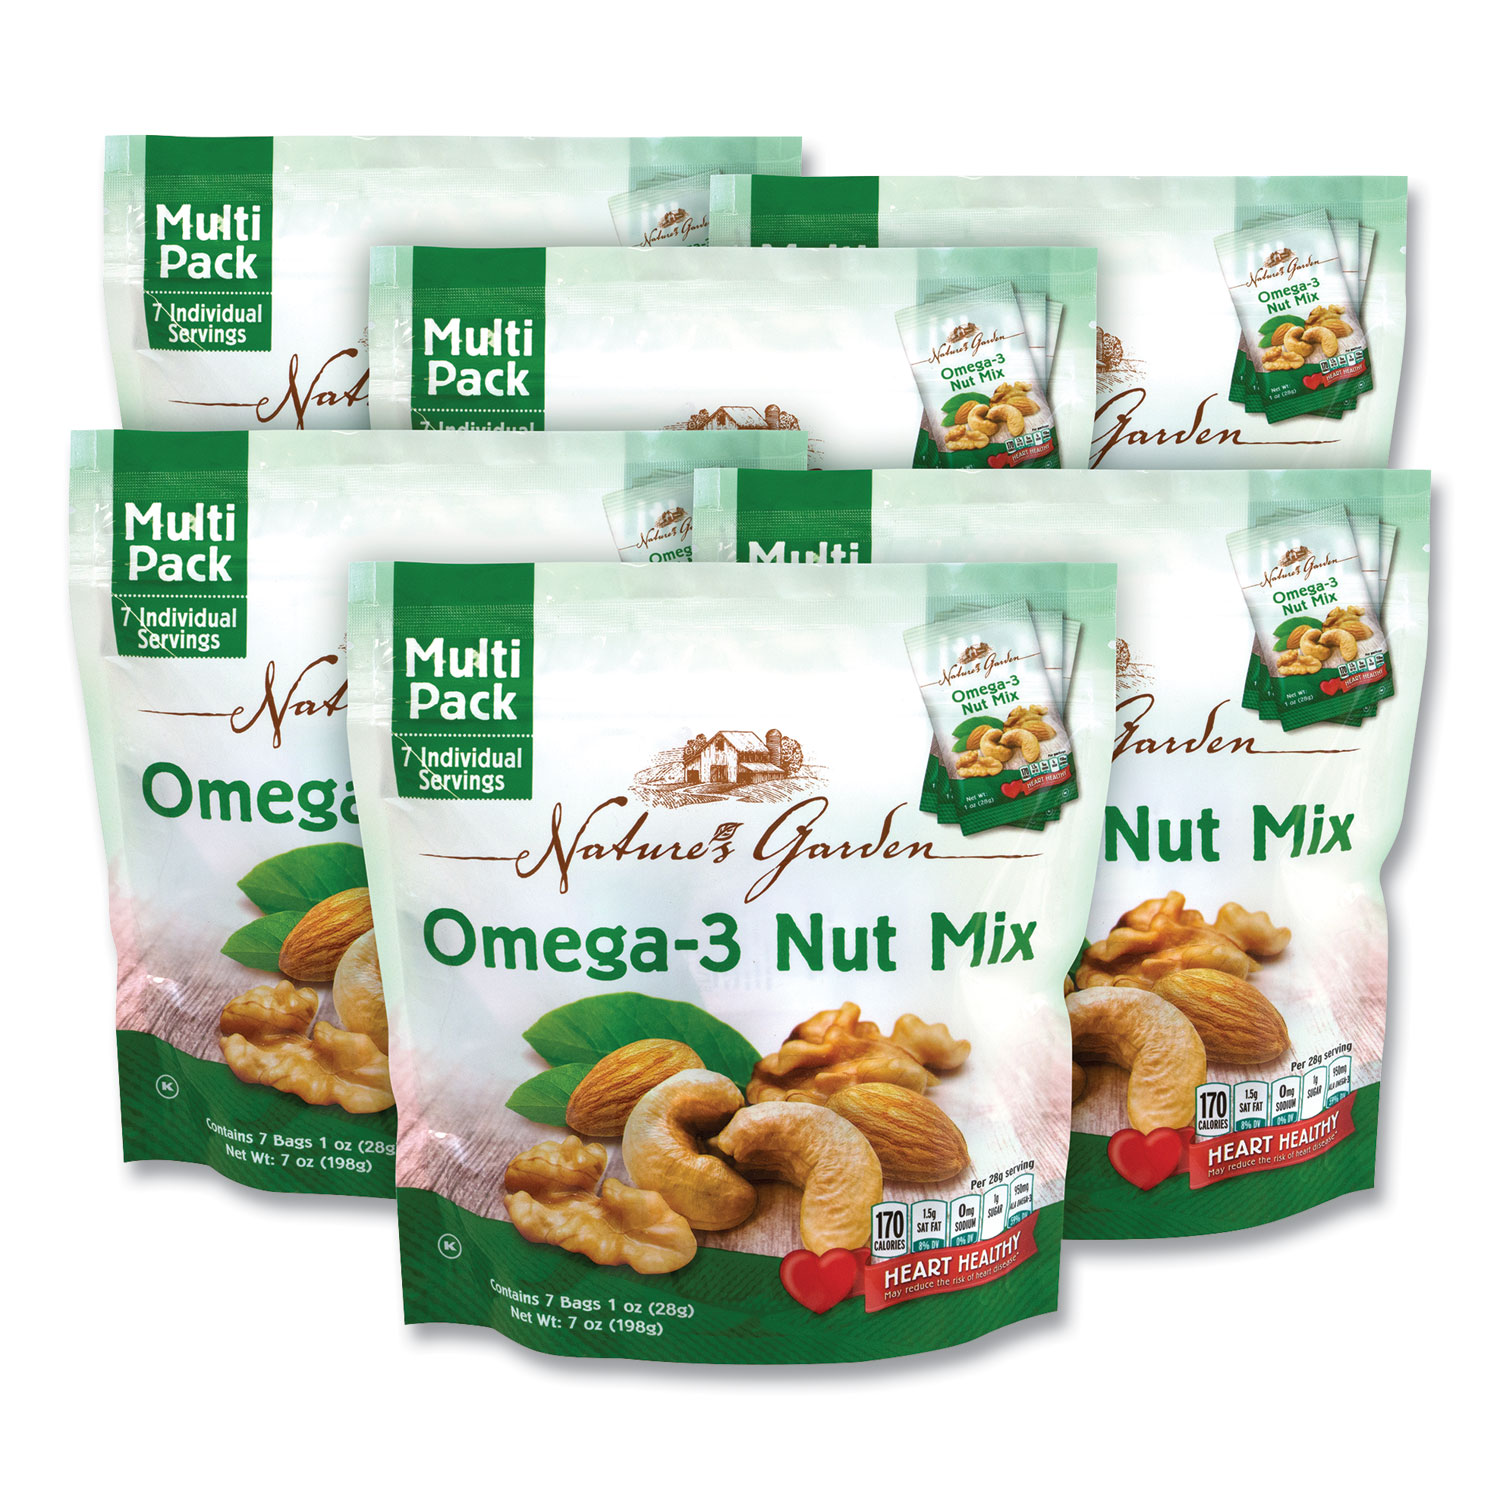 Natures Garden Omega-3 Nut Mix, 1 oz Pouch, 7 Pouches/Pack, 6 Packs/Box, Free Delivery in 1-4 Business Days